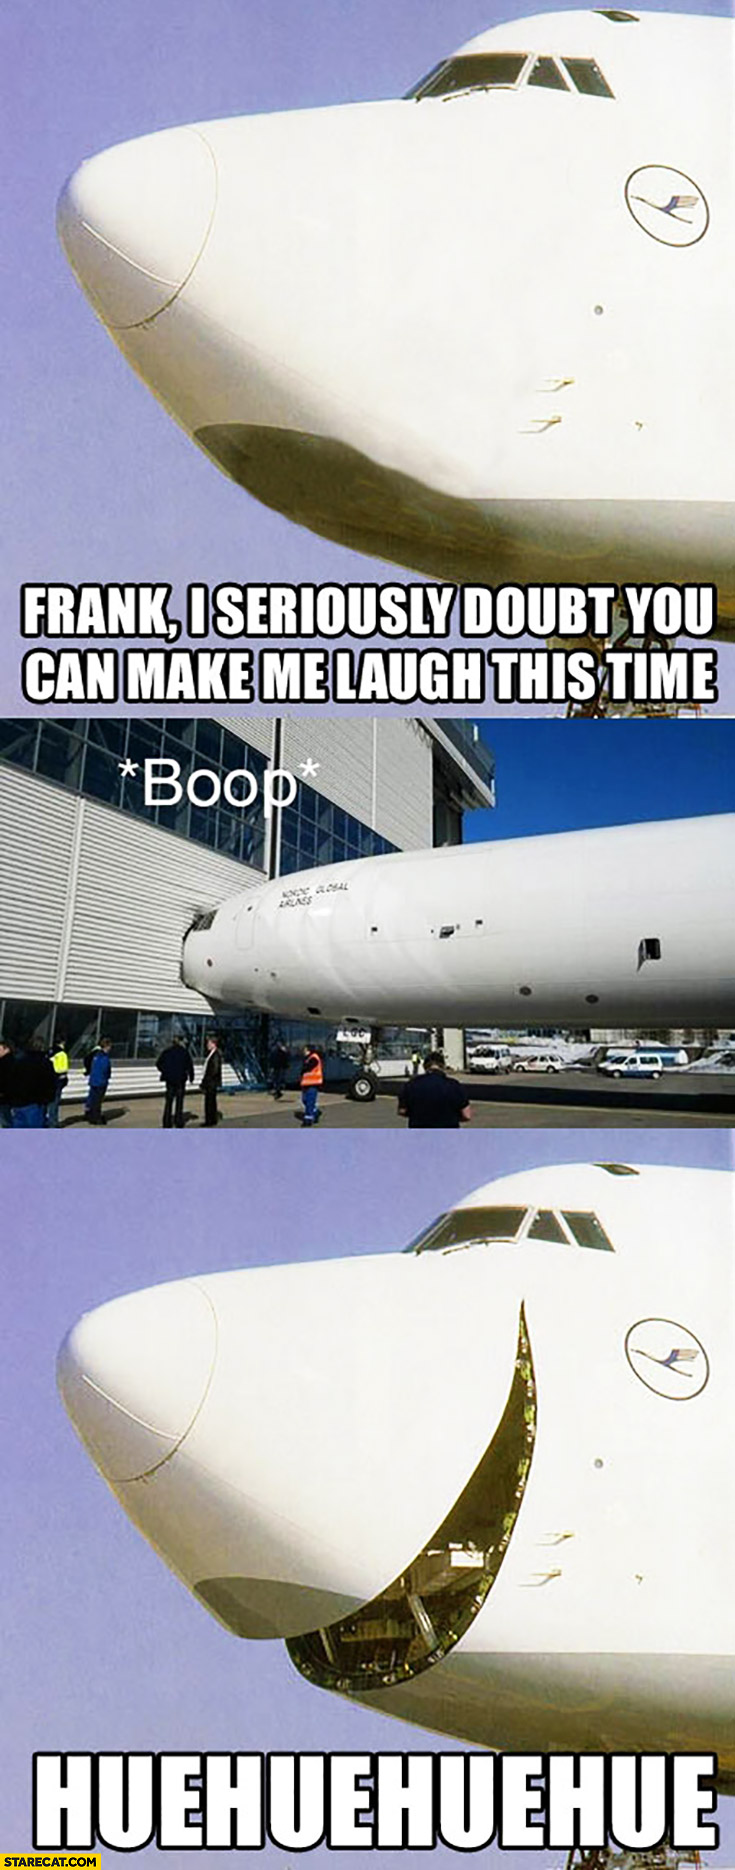 Frank I seriously doubt you can make me laugh this time. *Boop* huehuehue aeroplanes laughing funny planes